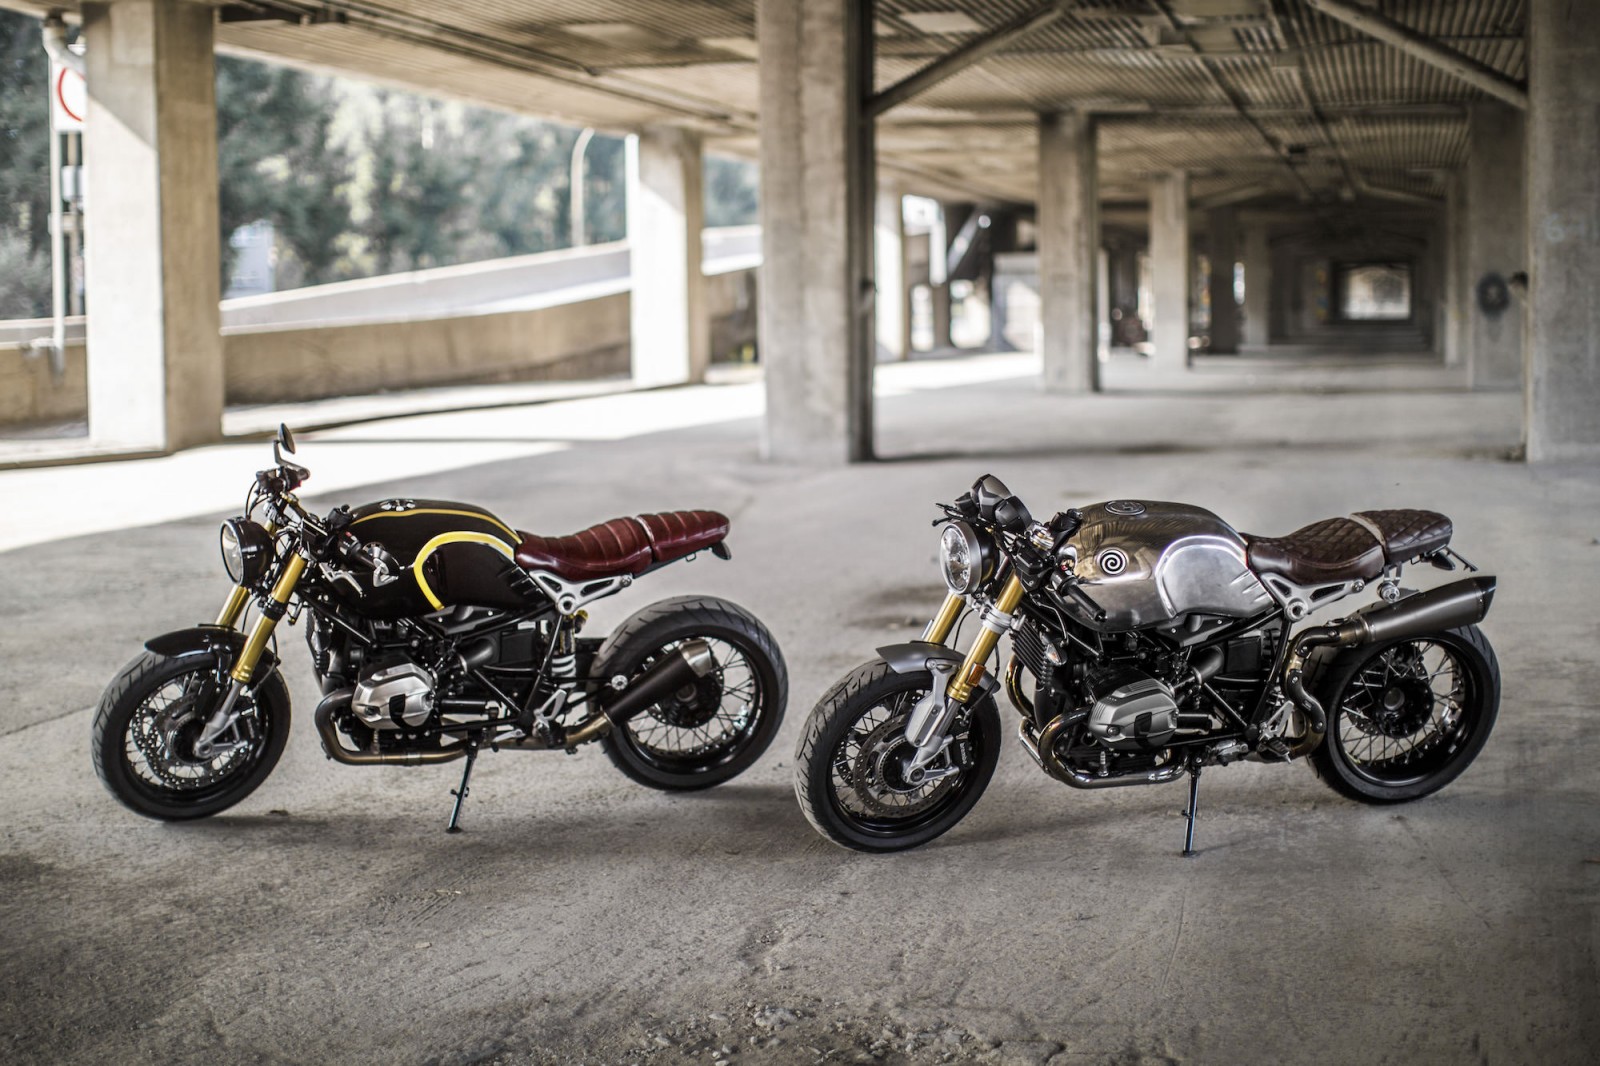 Two BMW R nineT customs from Stephane Tanguay and Patrick Boivin (Montreal)